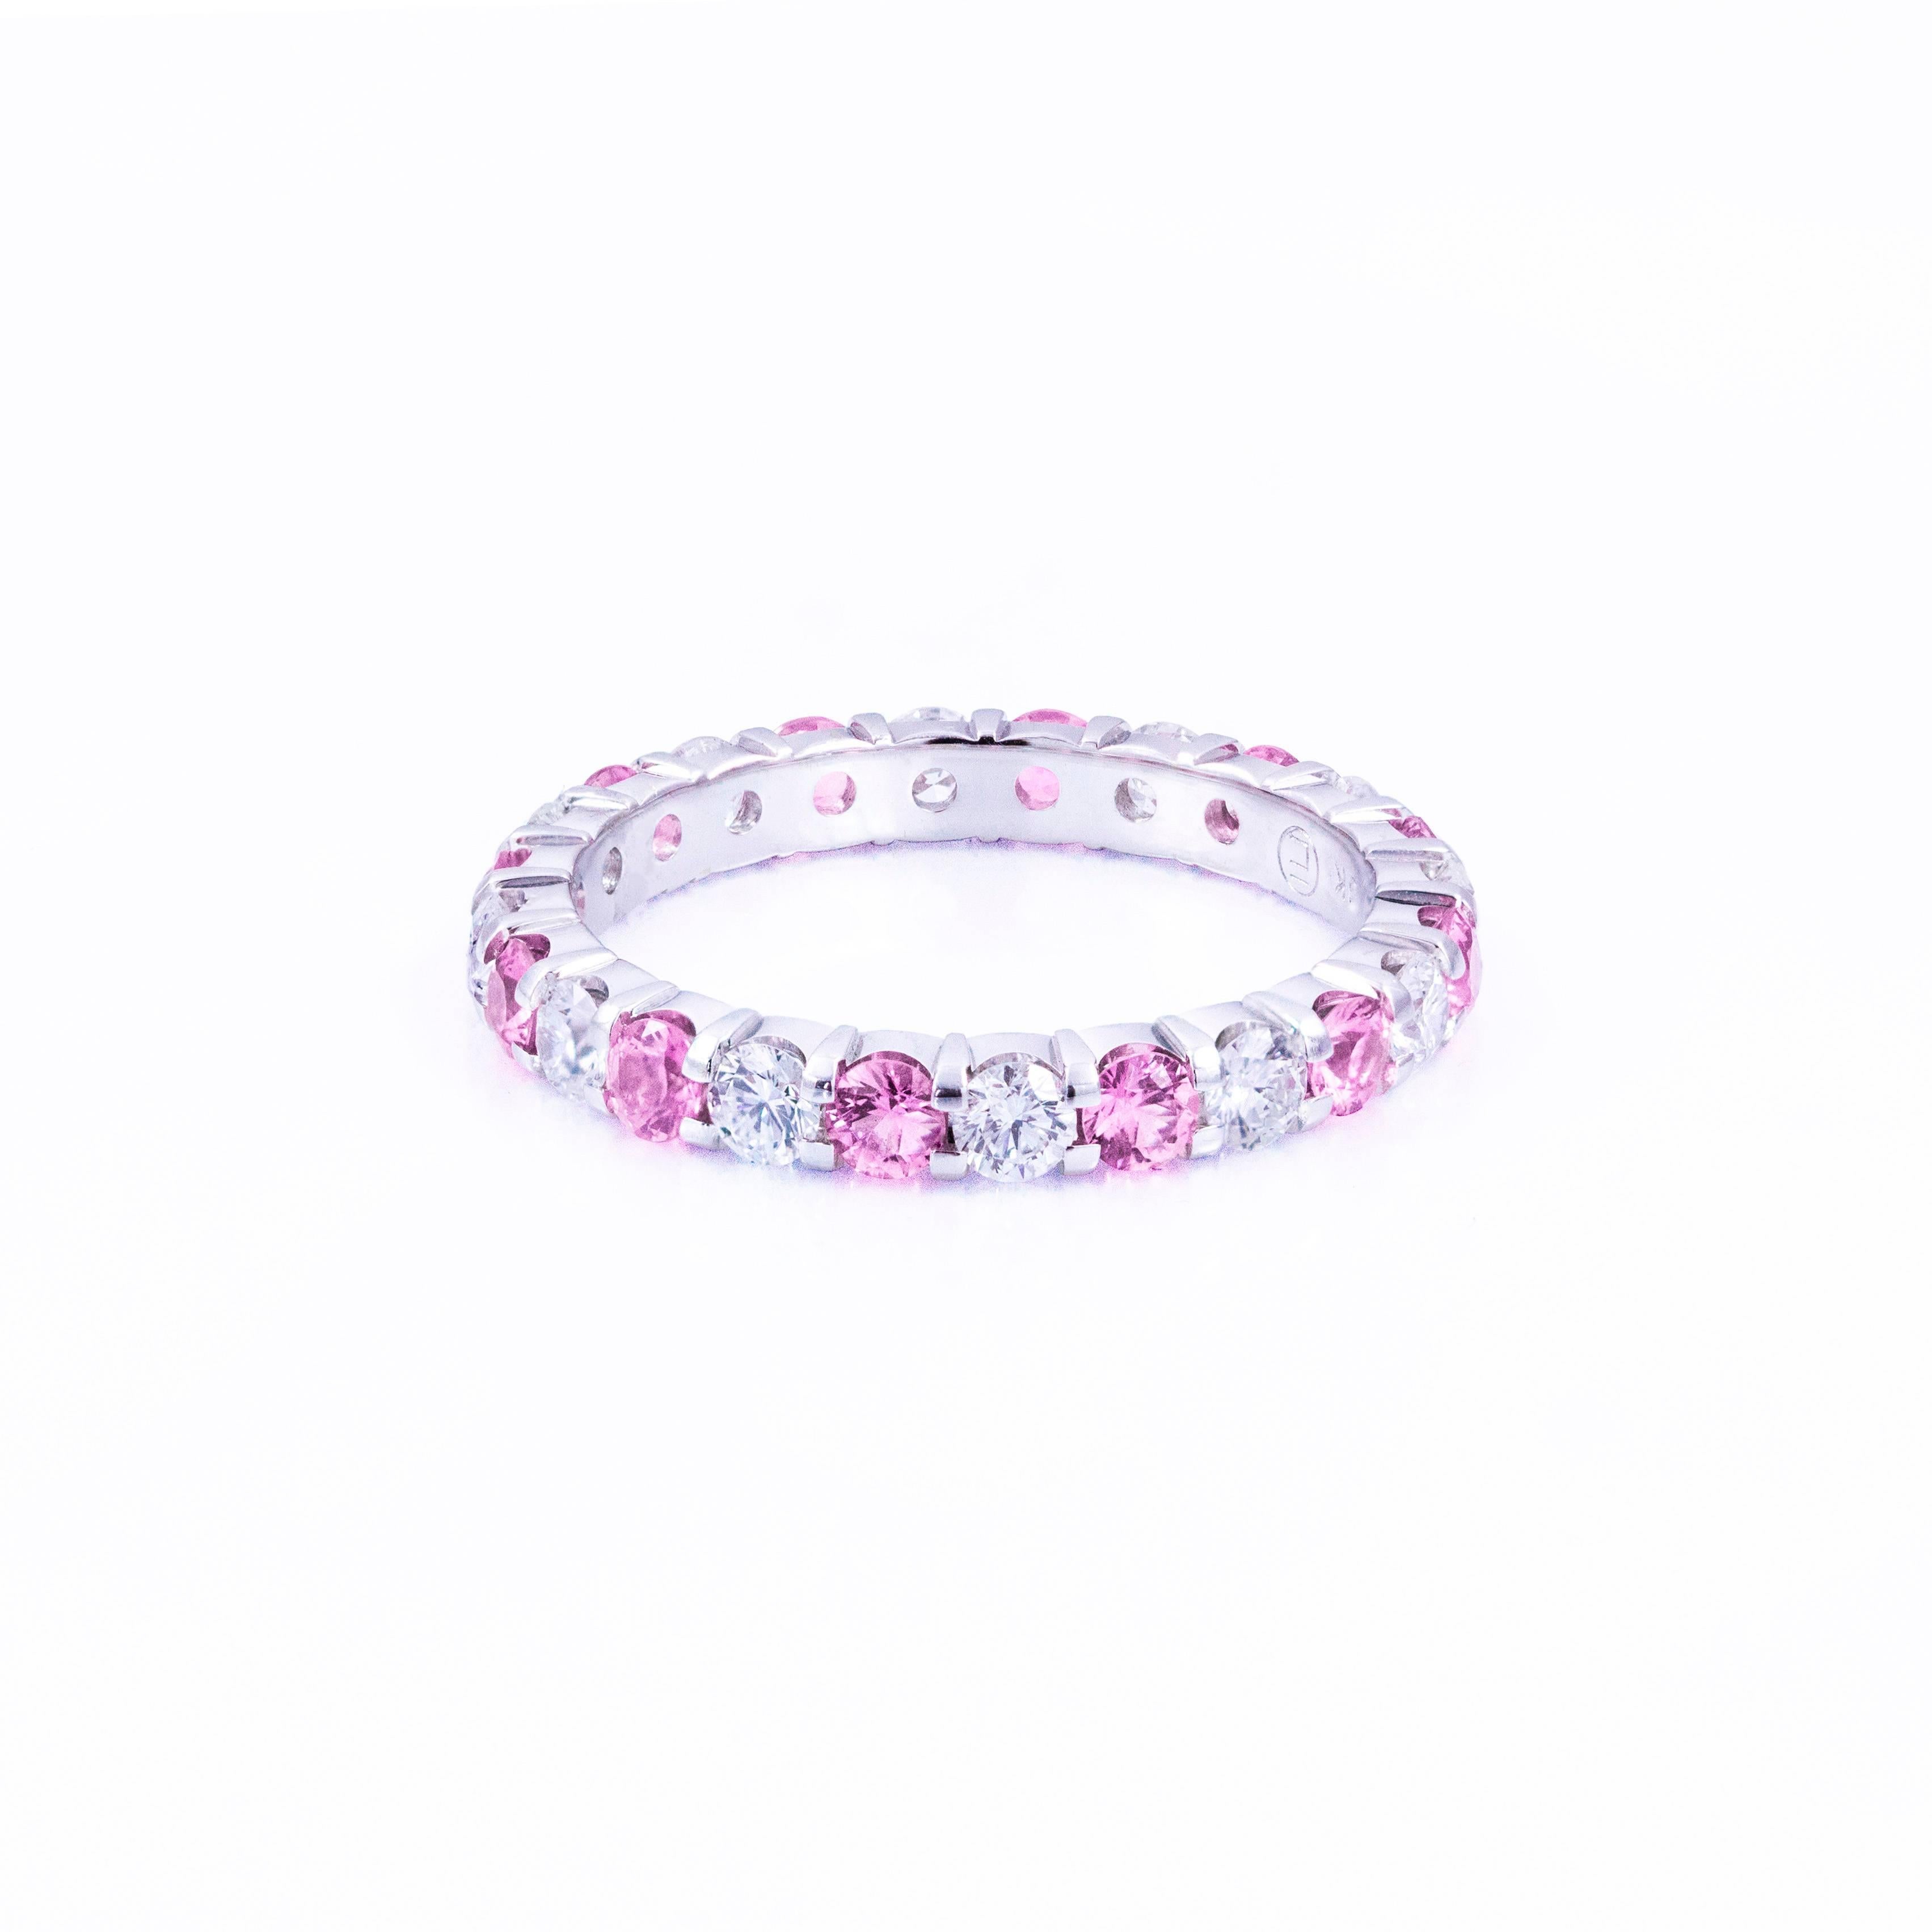 This gorgeous ring is set 12 natural pink sapphires weighing 1.02 carats that alternate with 12 round brilliant diamonds weighing 0.86 carats total. Set in 18k white gold. Size 7 US.

Style available in different price ranges. Prices are based on